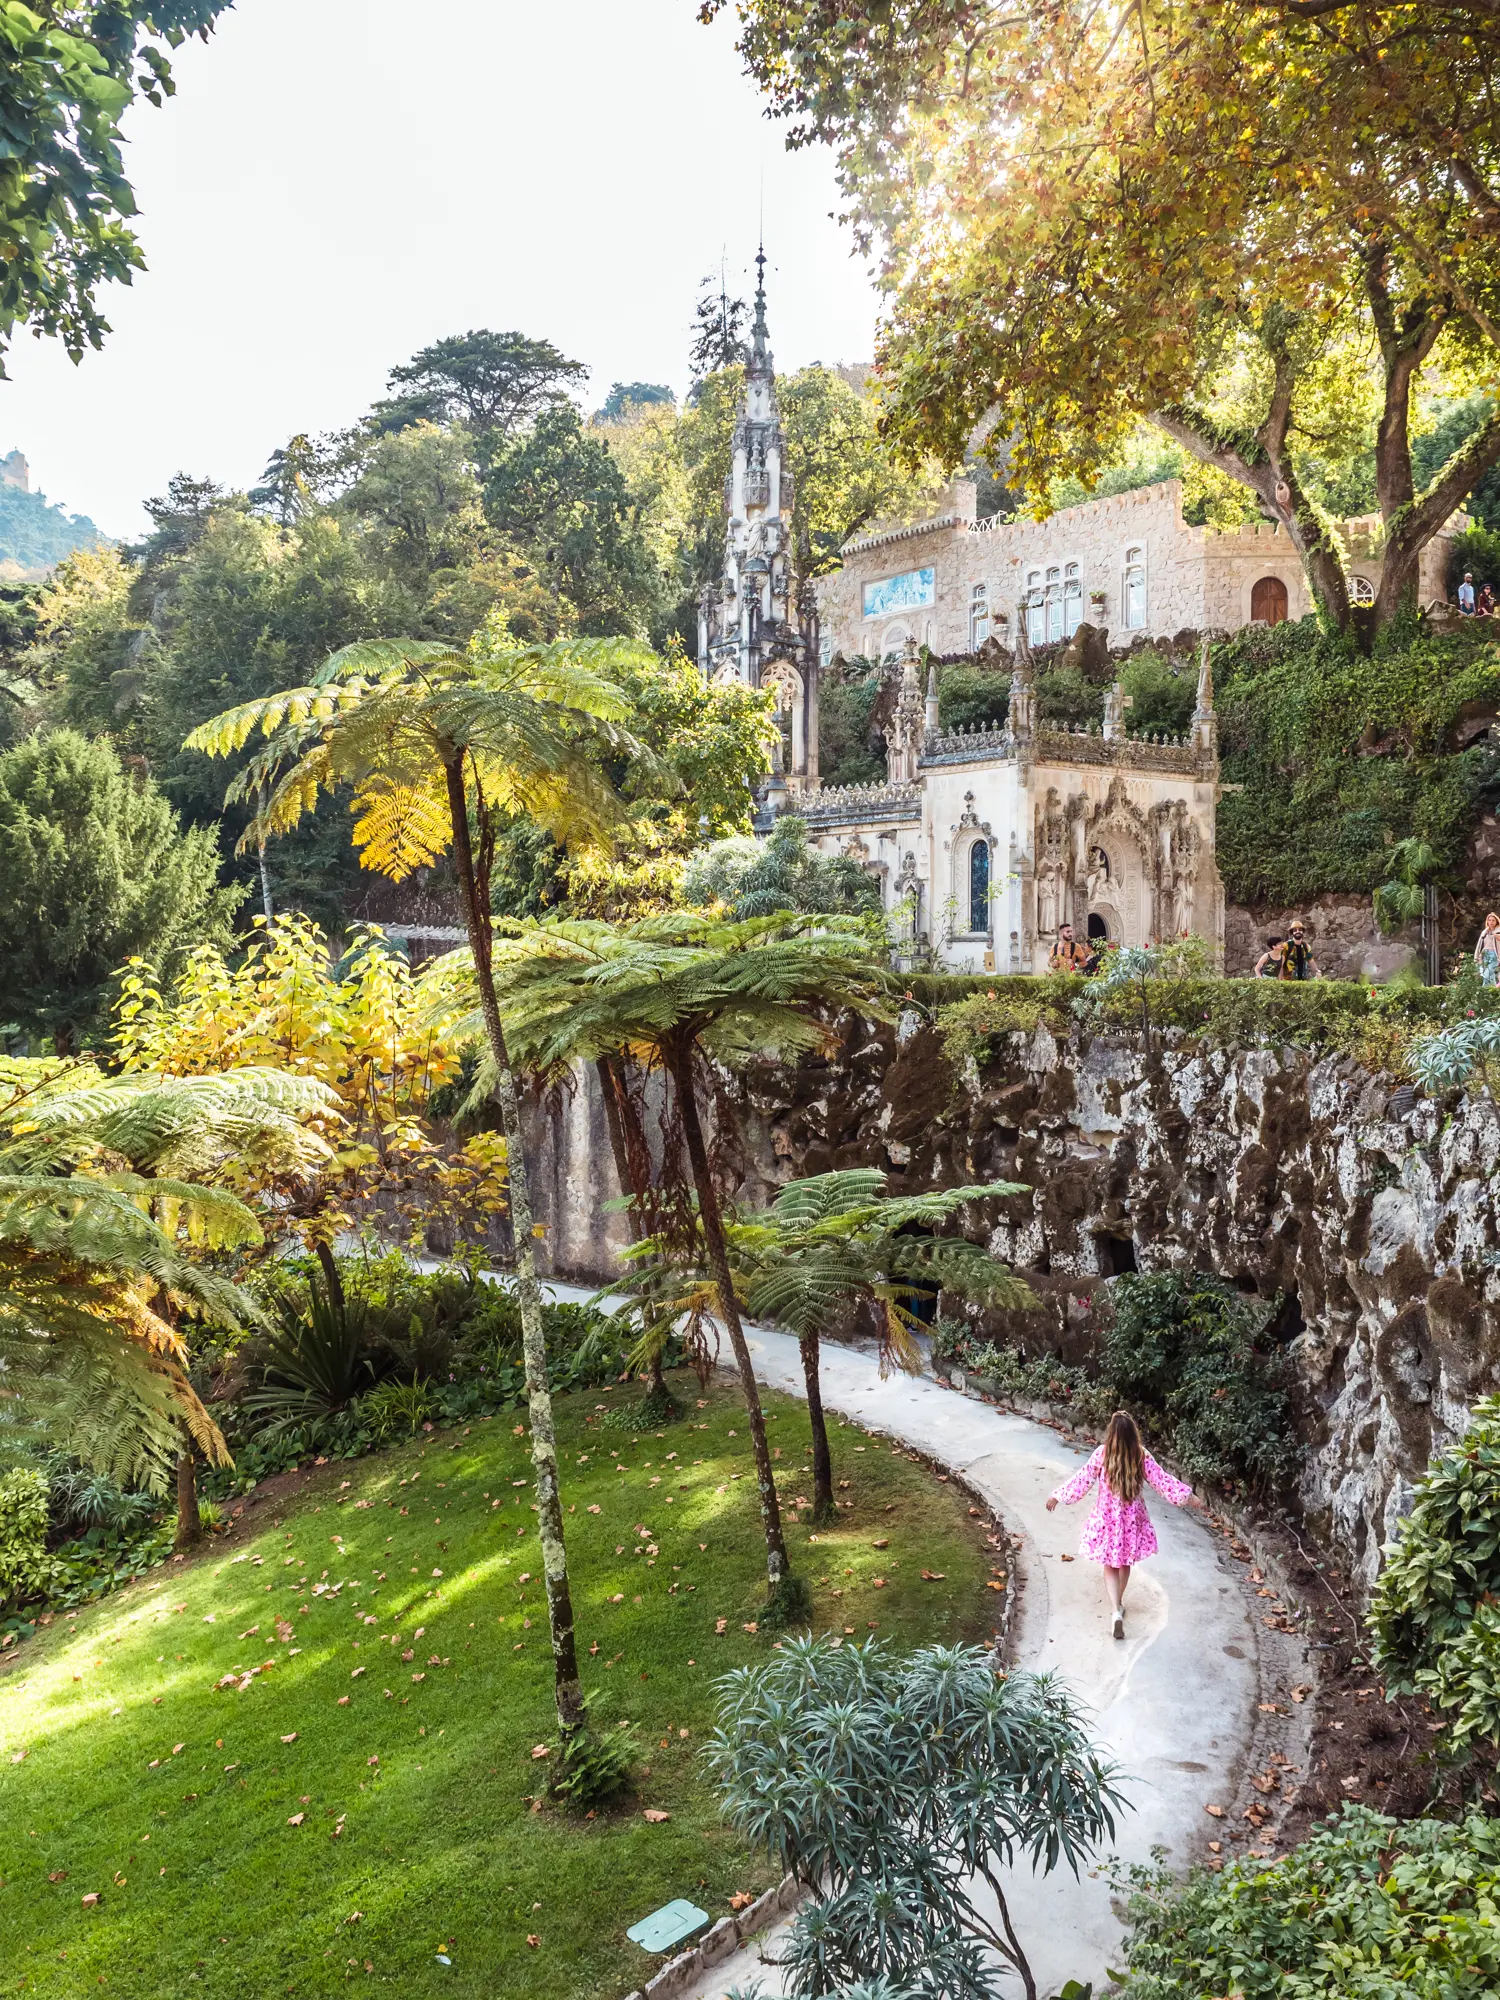 Girl with long hair, n a pink dress, walking on a light grey path along the stone wall of Quinta da Regaleira palace surrounded by green grass and trees.